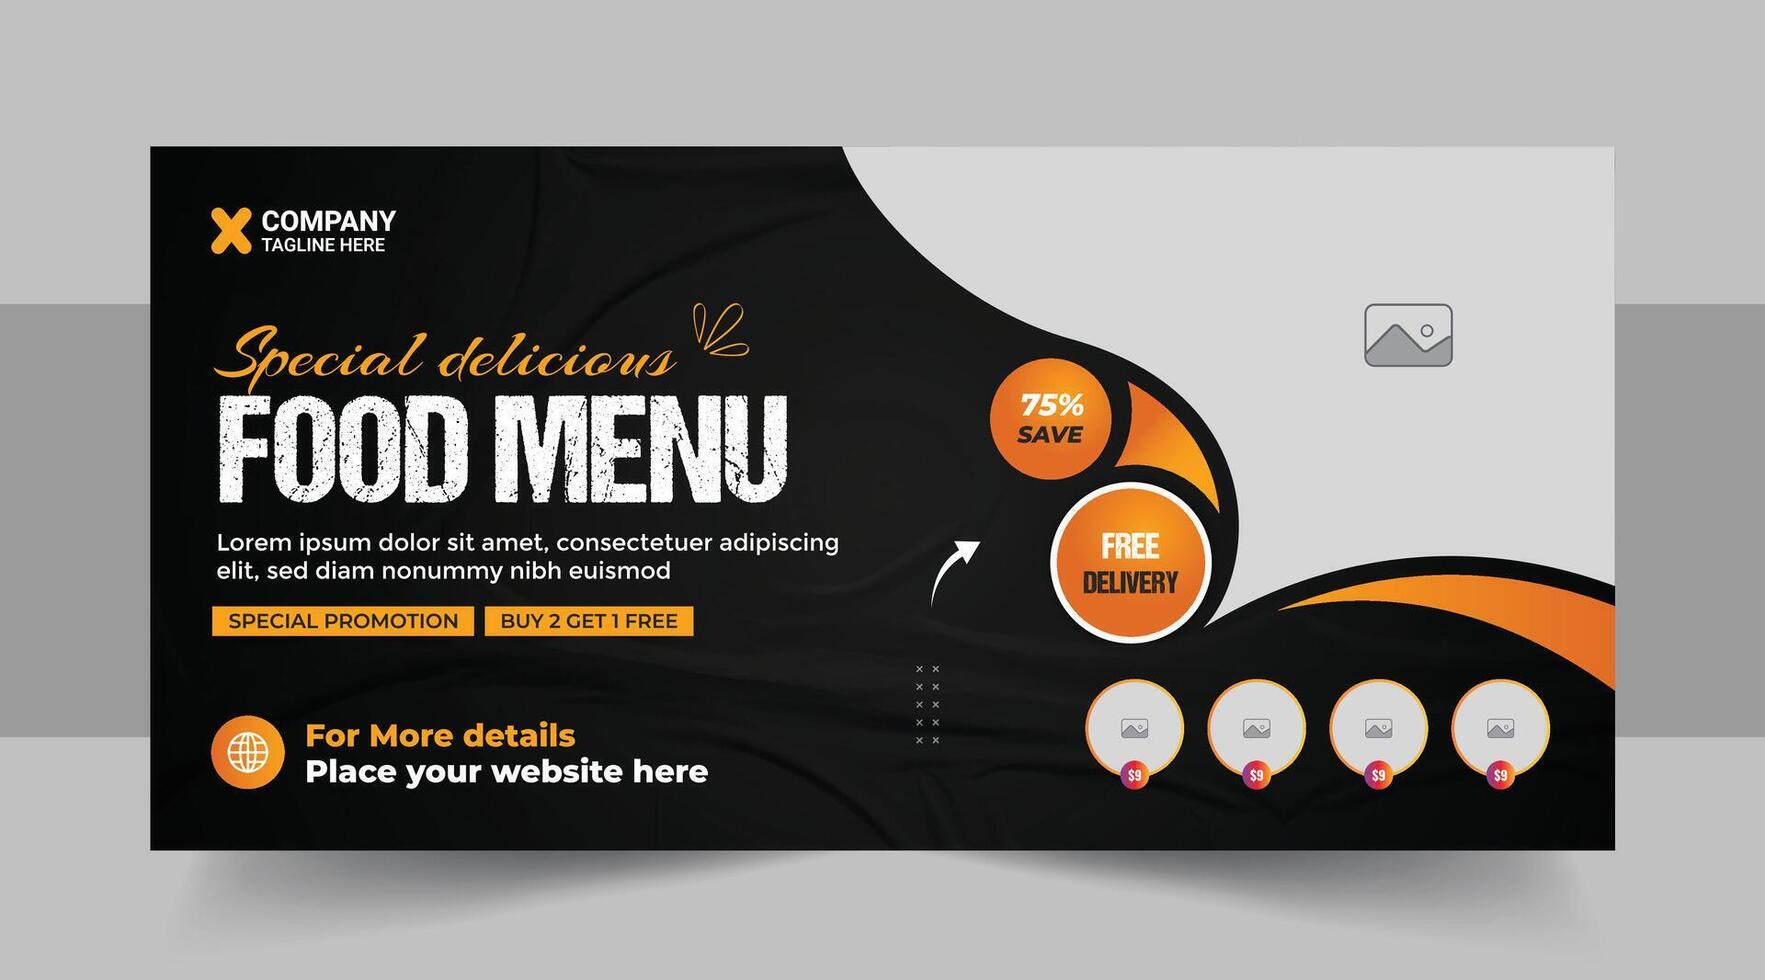 Fast food or Restaurant business promotion social media marketing web banner template with logo and icon, Pizza, burger or healthy food business promotional flyer design layout vector